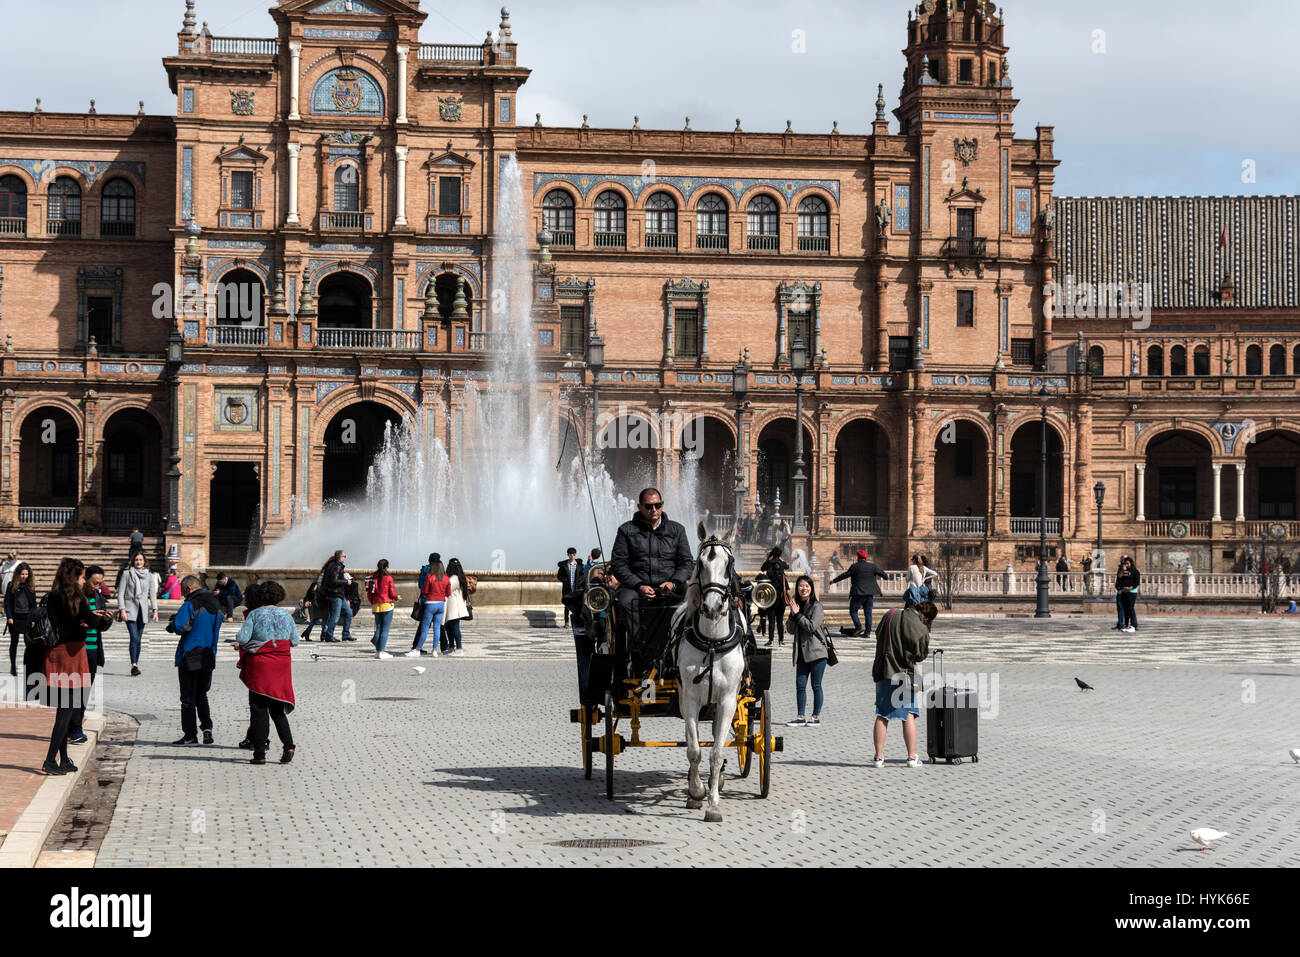 A horse & carriage giving tourist a guided tour at  the semi-circle frontage of the  Plaza de Espana, a popular venue in Seville, Spain.   The site is Stock Photo